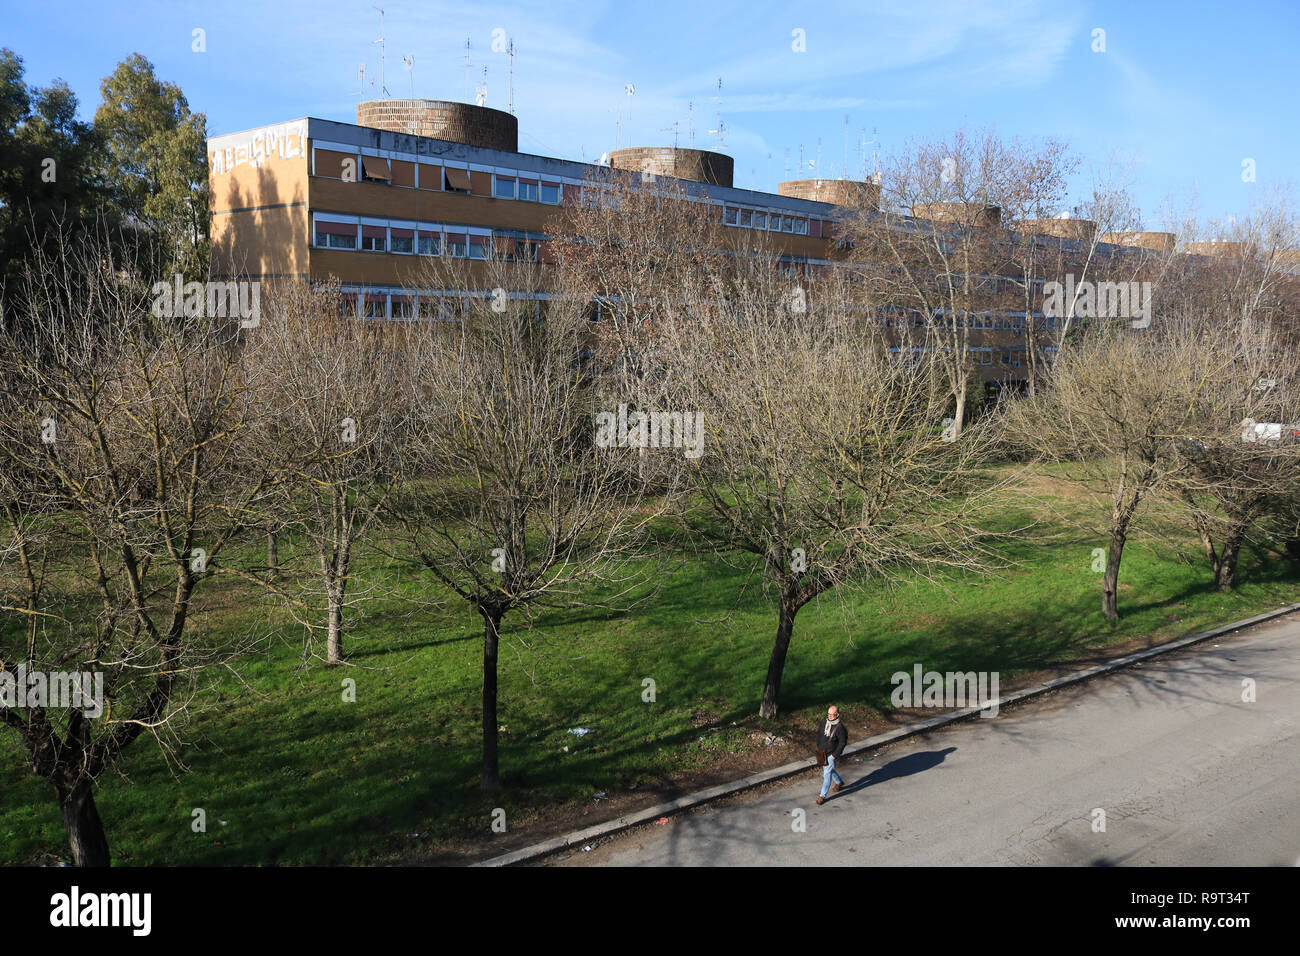 Rome, Italy. 29th Dec, 2018. A view of the former 1960 Olympic village for 83 competing nations is bathed in sunshine as Rome experiences unseasonably warm weather for December. Rome hosted the 1960 Summer Olympics which was officially known as the 17th Olympiad  Credit: amer ghazzal/Alamy Live News Stock Photo